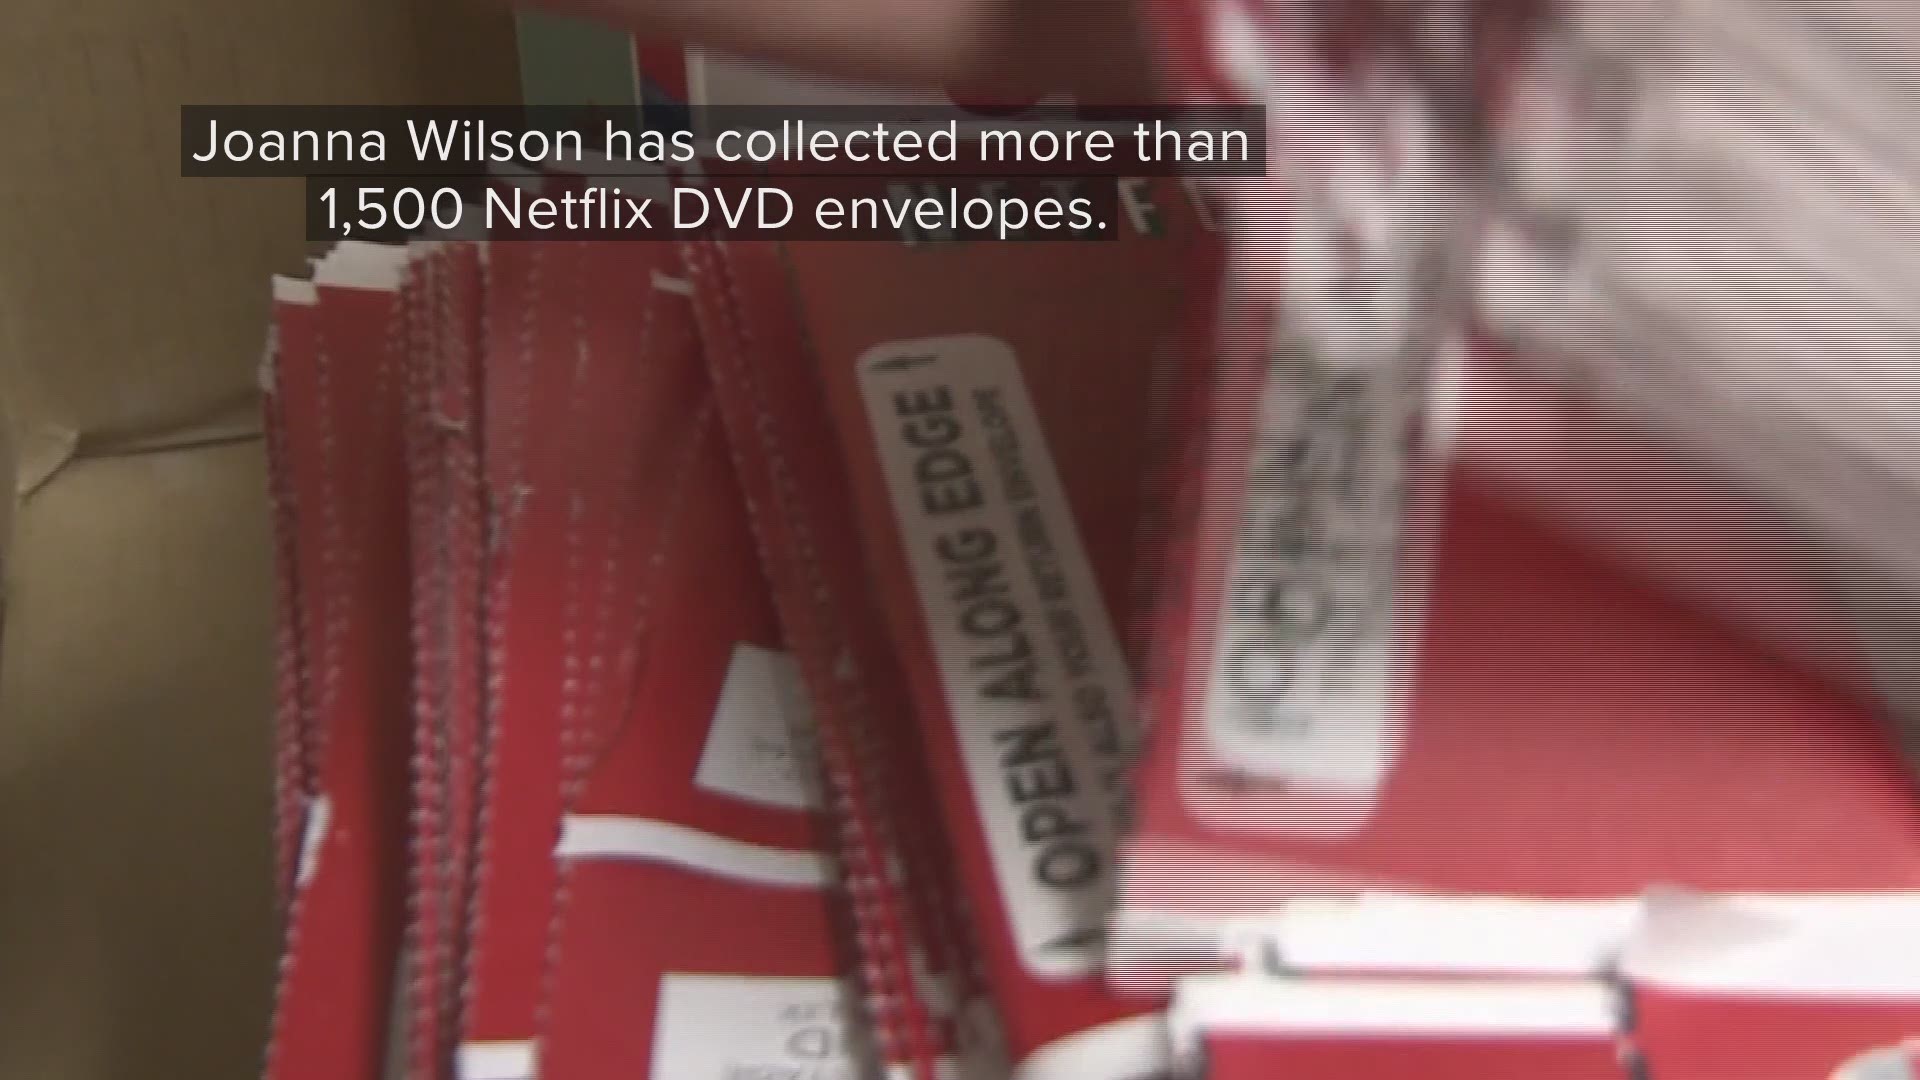 Over the past 13 years, Joanna Wilson has collected more than 1,500 Netflix DVD envelopes. 
Her vision of transforming the collection into a dress has come to life.